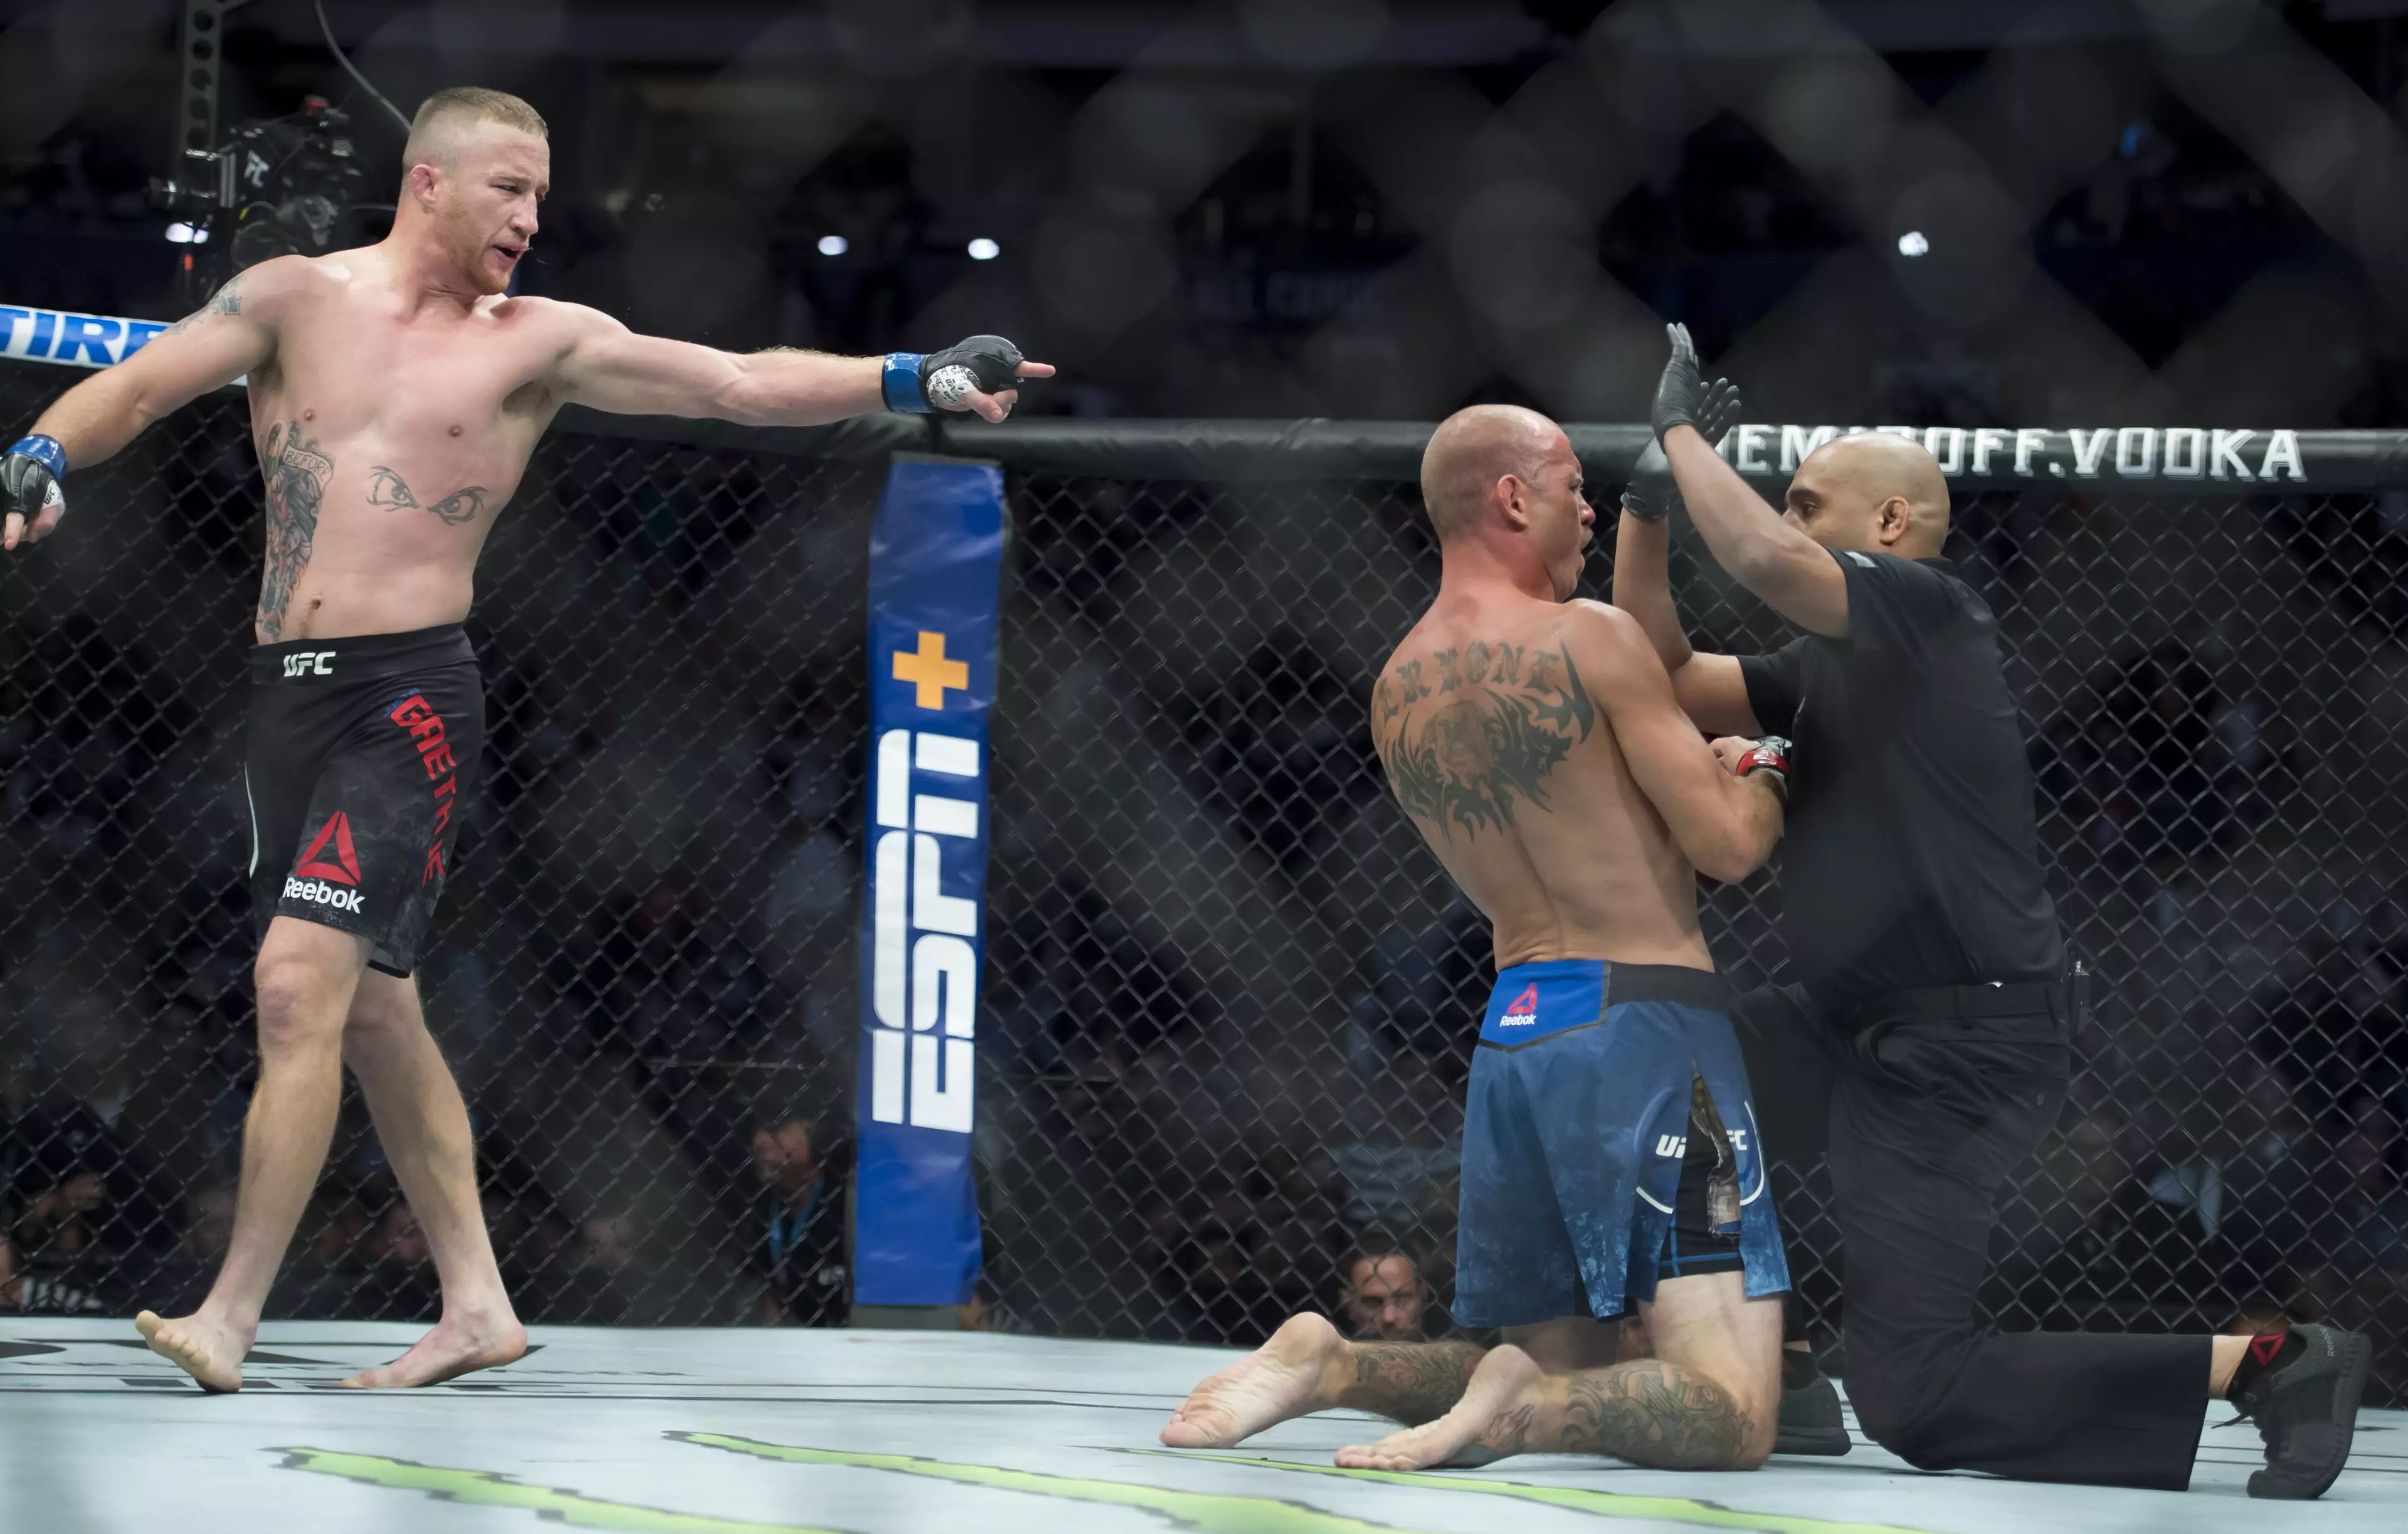 Justin Gaethje won by first-round knockout for the third fight in a row